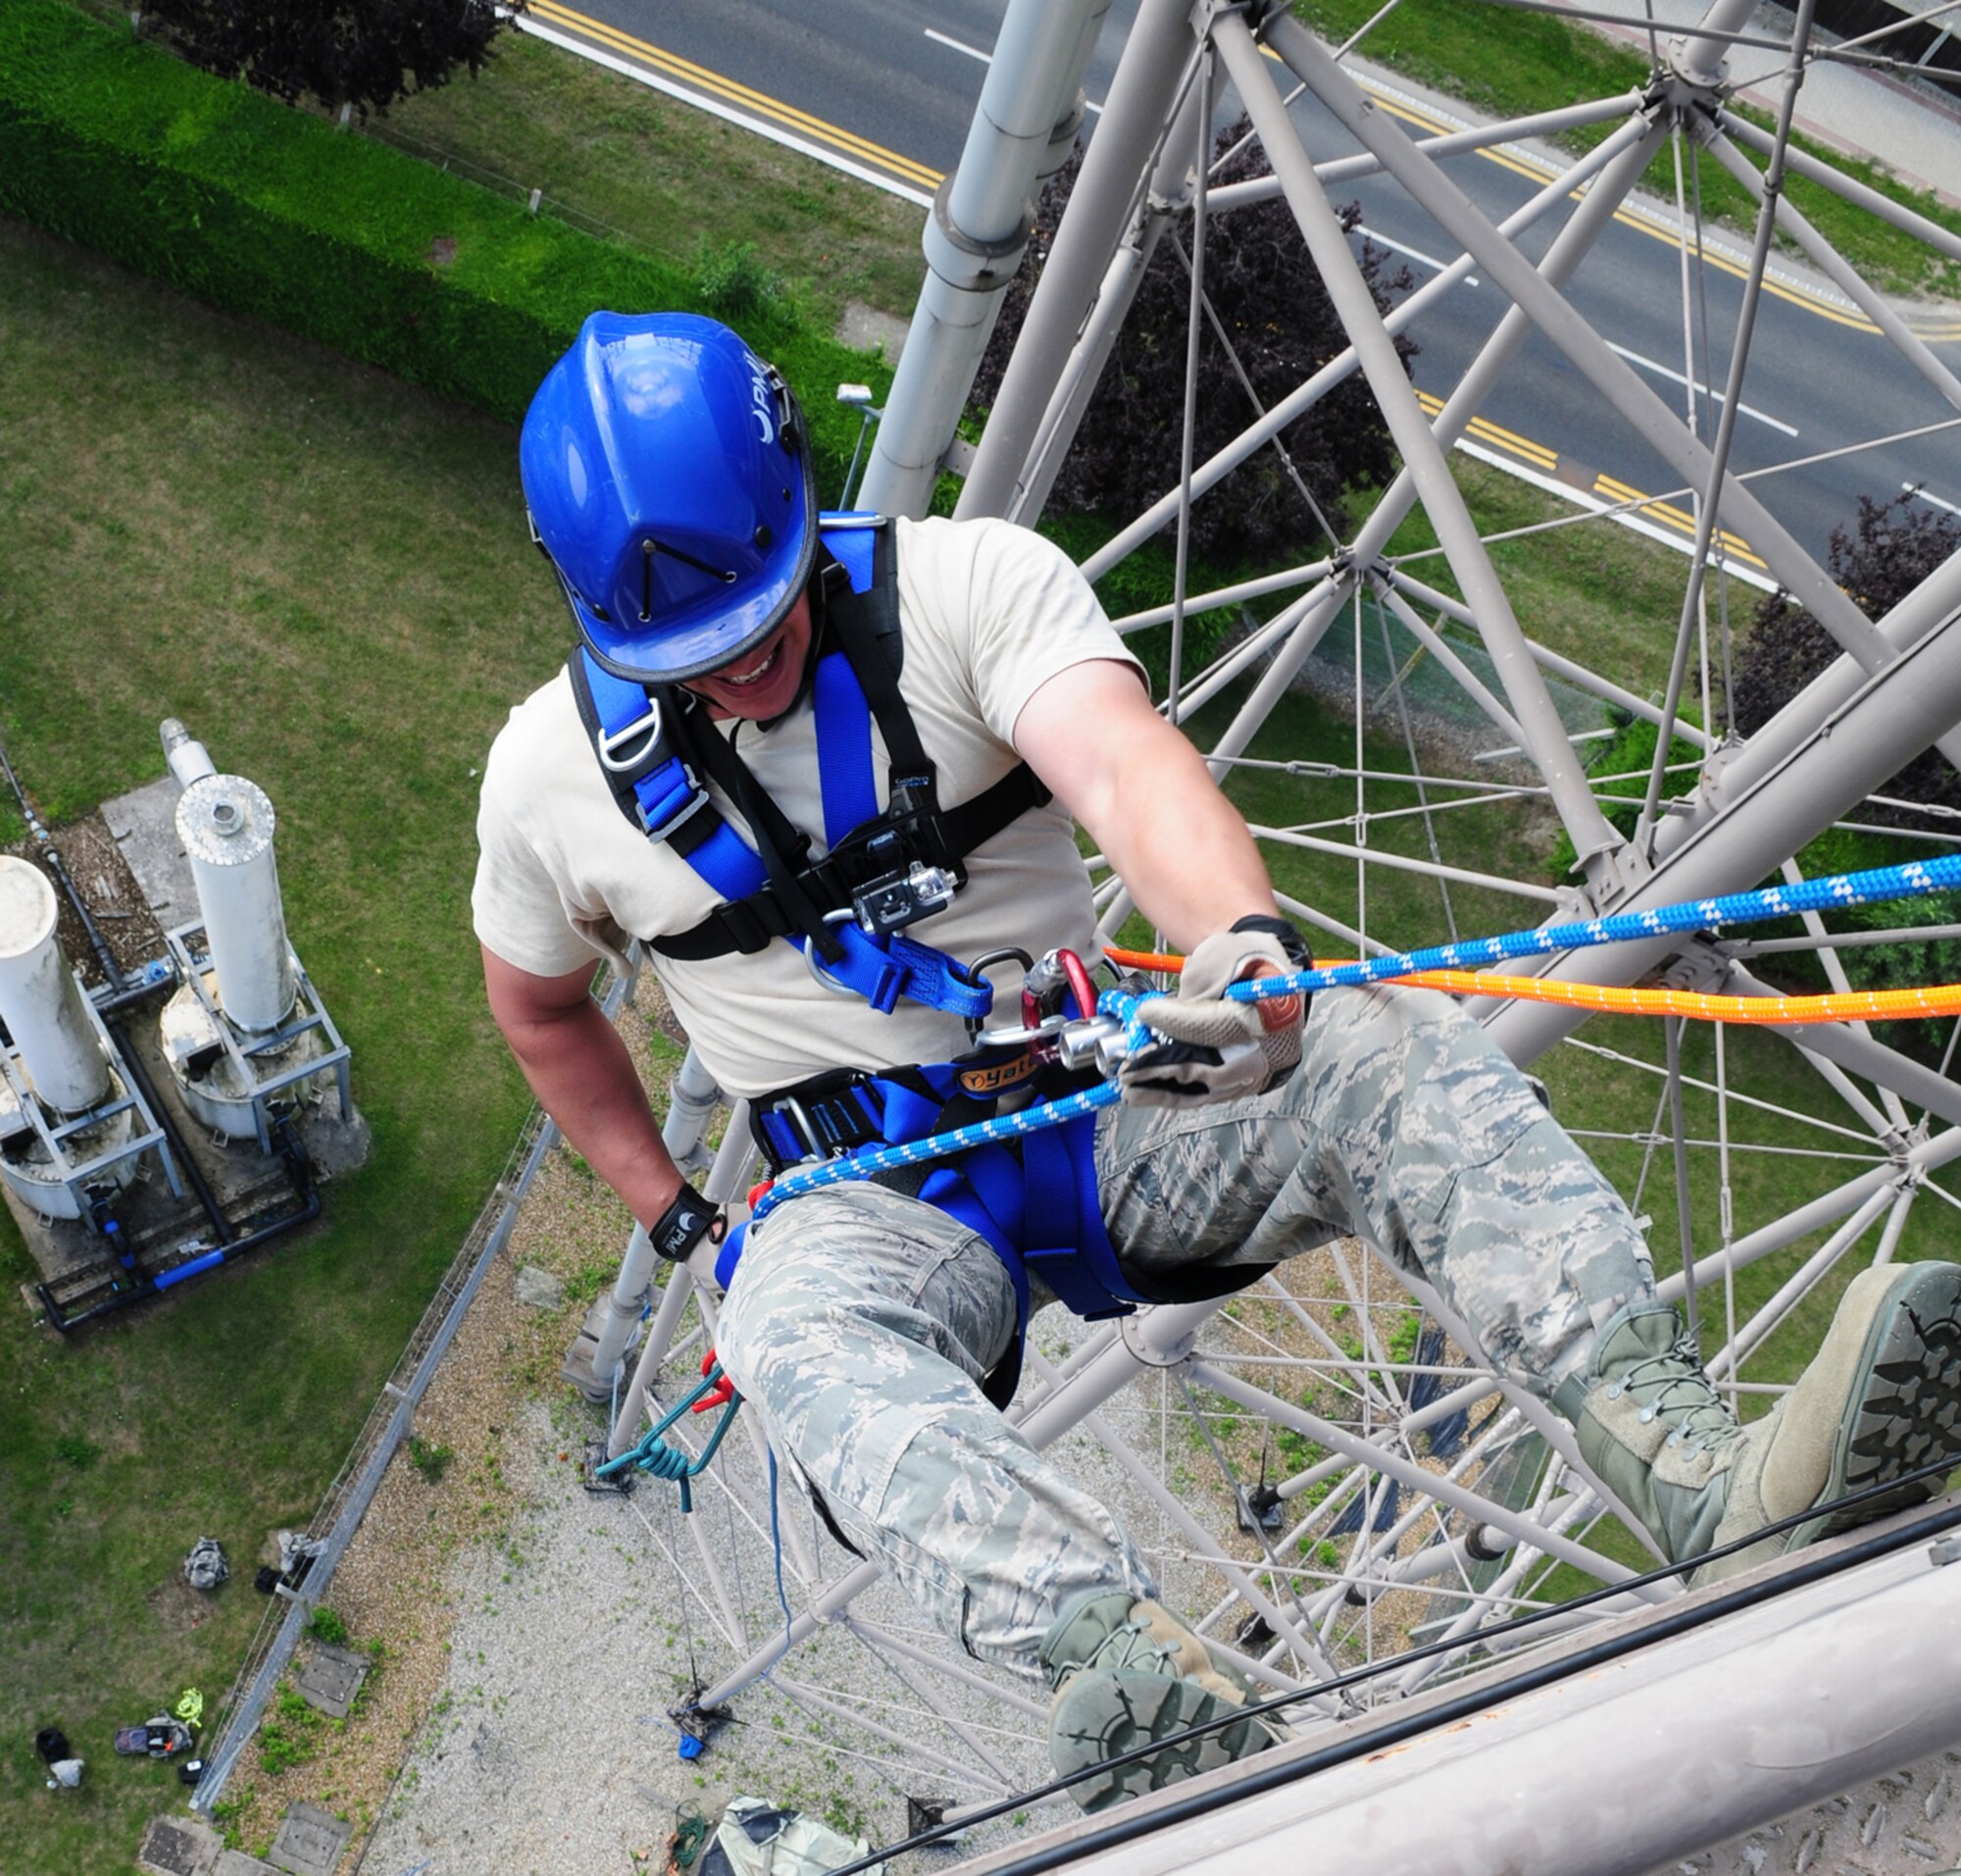 U.S. Air Force Staff Sgt. Noel Rivera-Saldena, 100th Civil Engineer Squadron Fire Department firefighter from Lake Mary, Fla., rappels from the top of a water tower, 120-feet above the ground, during a technical rope rescue training session Sept. 4, 2013, on RAF Mildenhall, England. This training is vital in teaching firefighters how to rappel from high buildings or facilities and provides them the knowledge of how to lower a casualty on a rope. (U.S. Air Force photo by Karen Abeyasekere/Released)